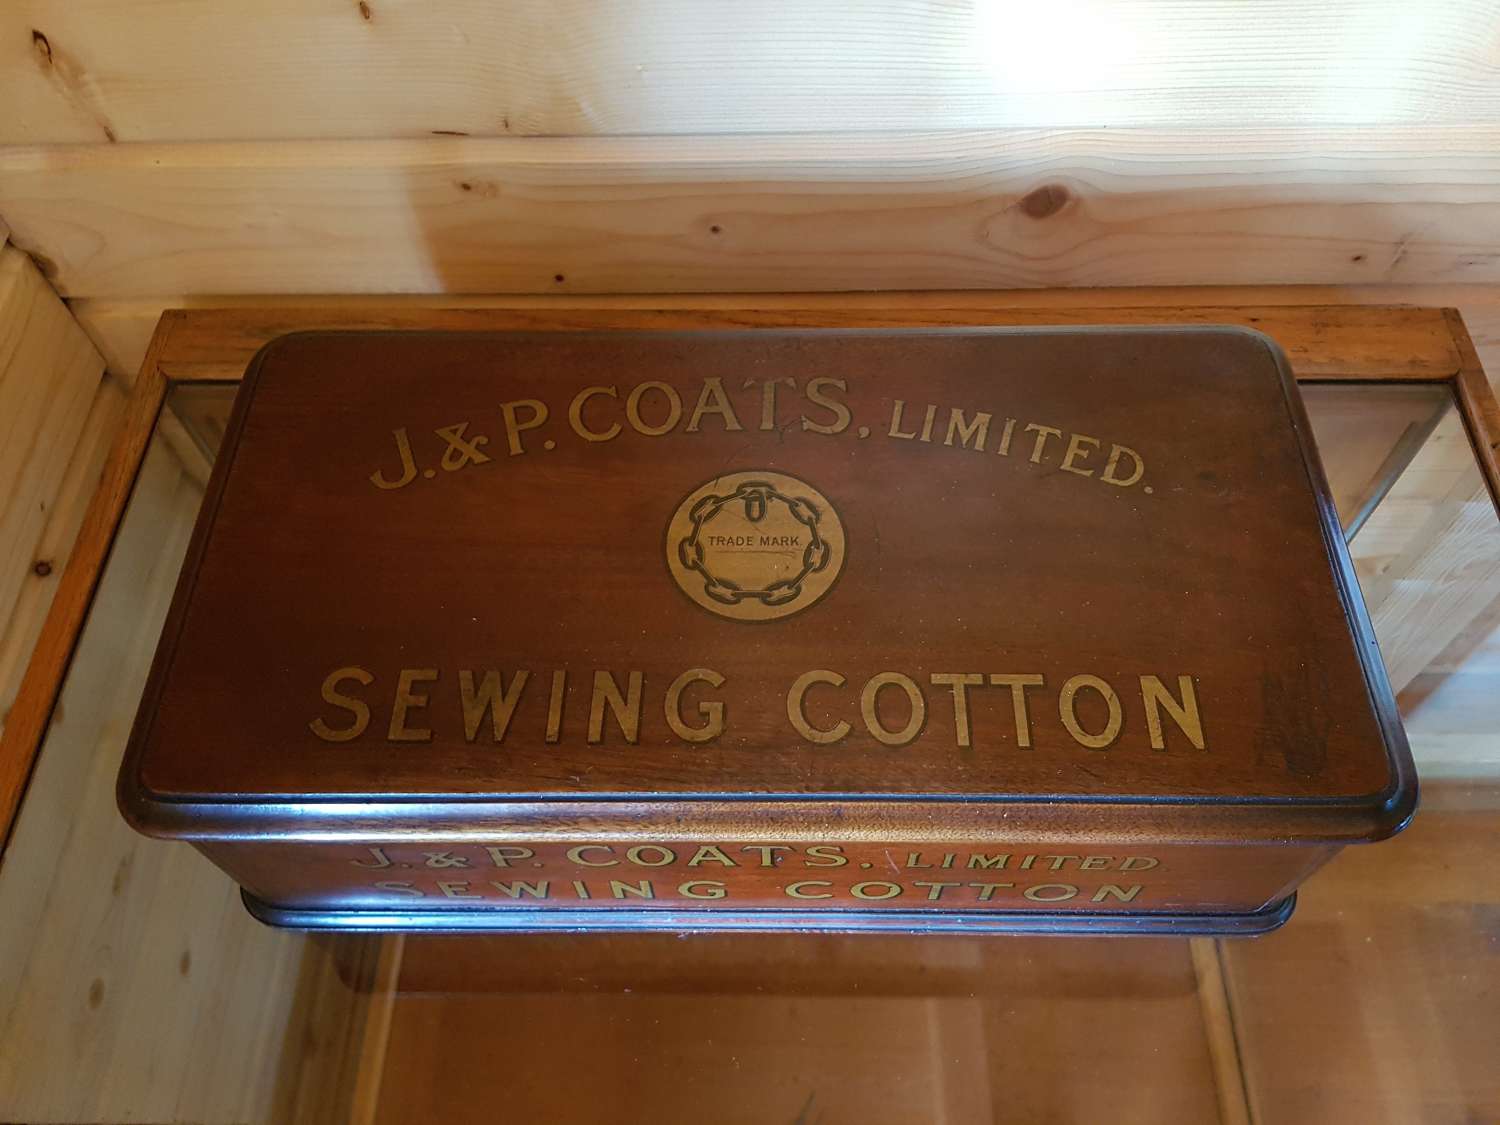 J&P Coats sewing cotton cabinet